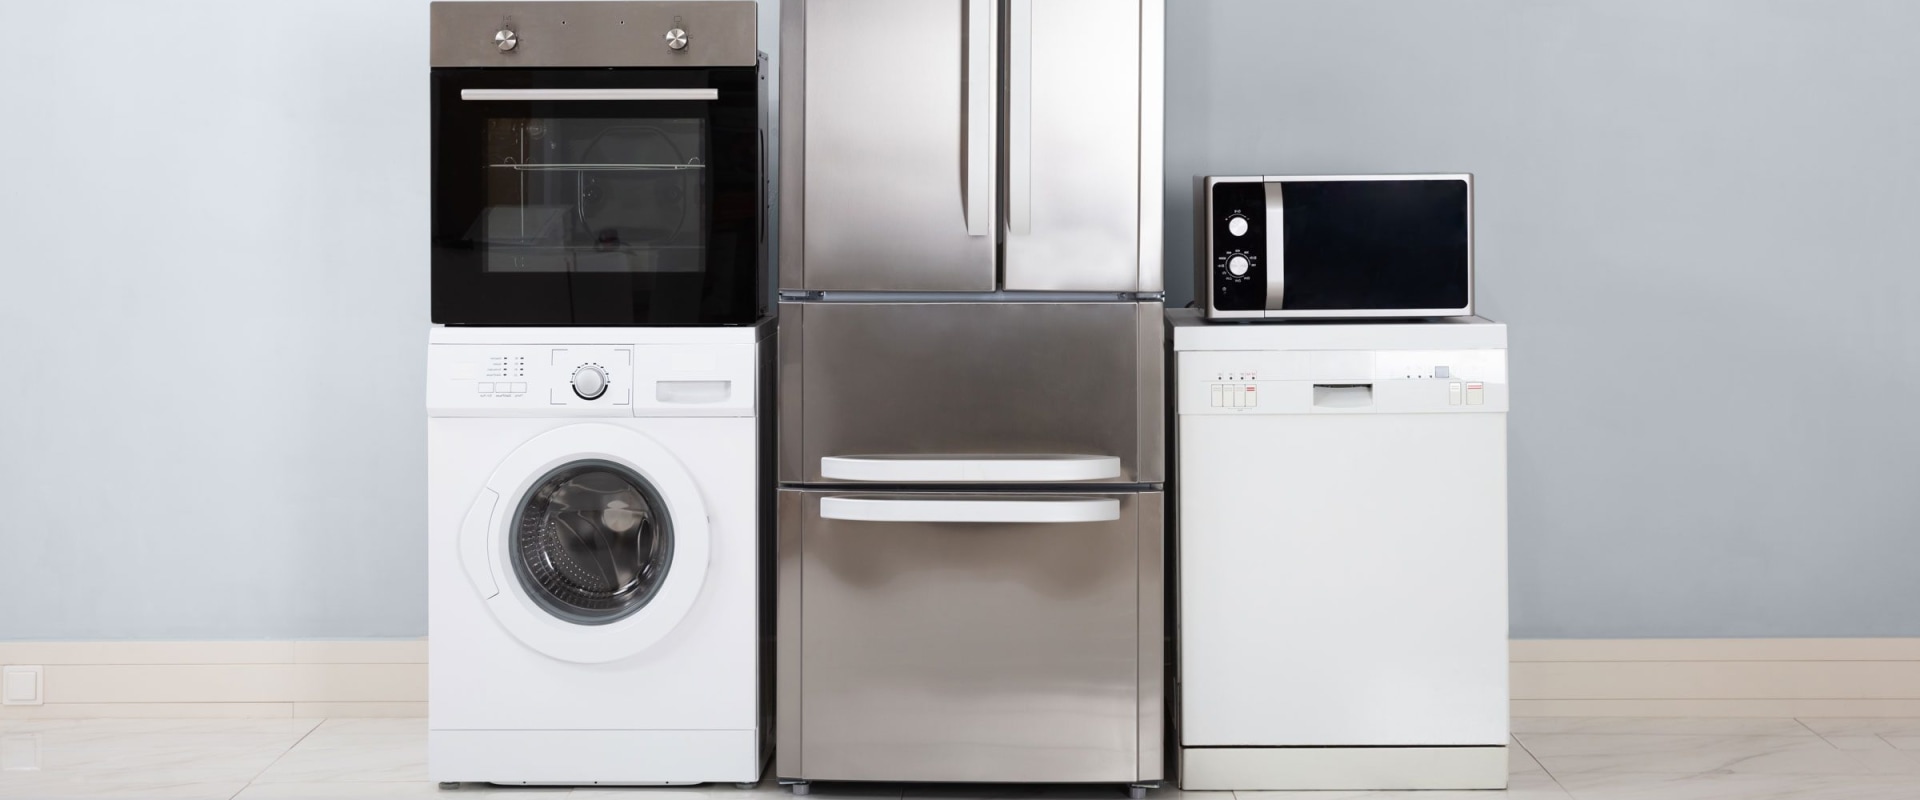 What is the most used appliance in the kitchen?